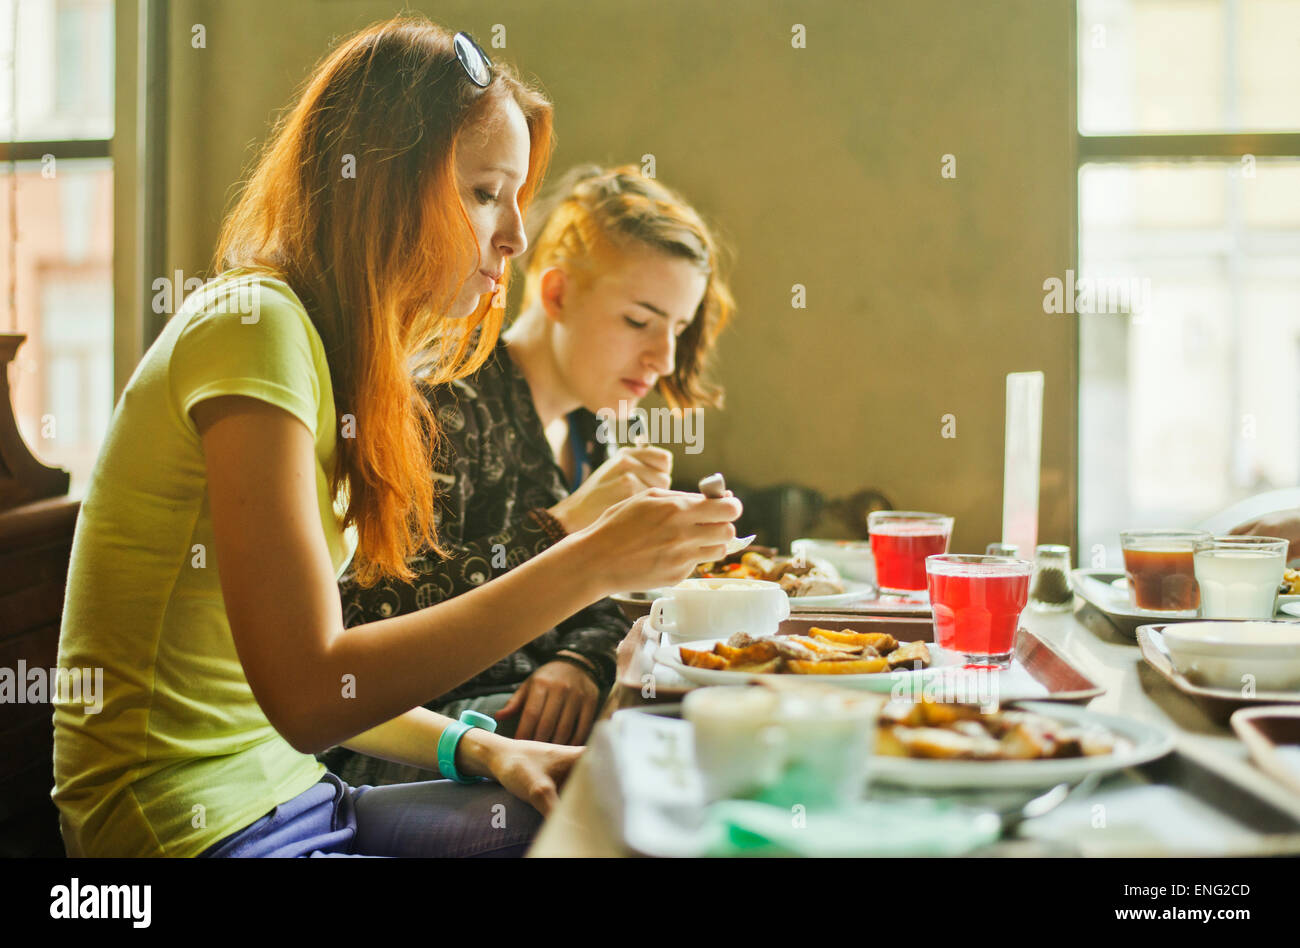 Caucasian women eating in dining room Stock Photo